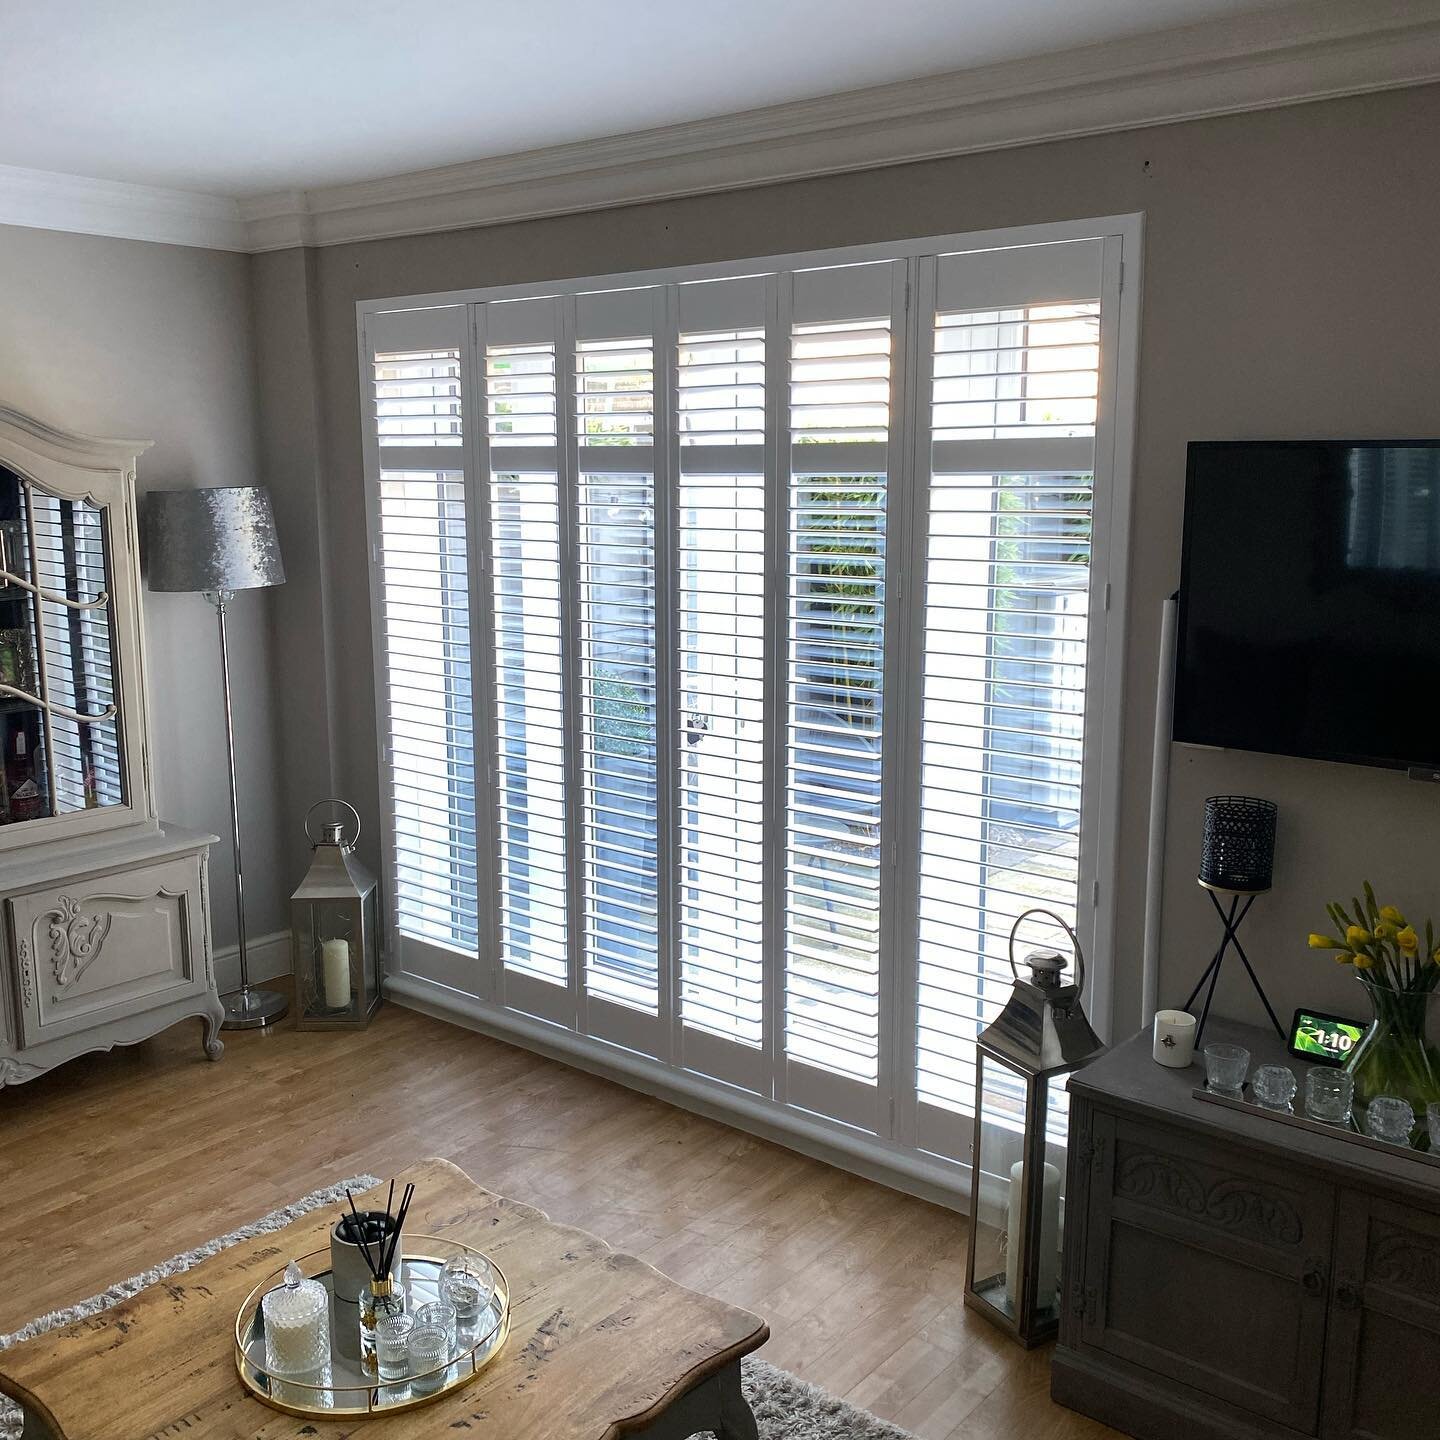 Another happy customer!!! Get in touch for your free no obligation quote!!! #plantationshutters #freequote #homedecor #homeinspiration #homeimprovement